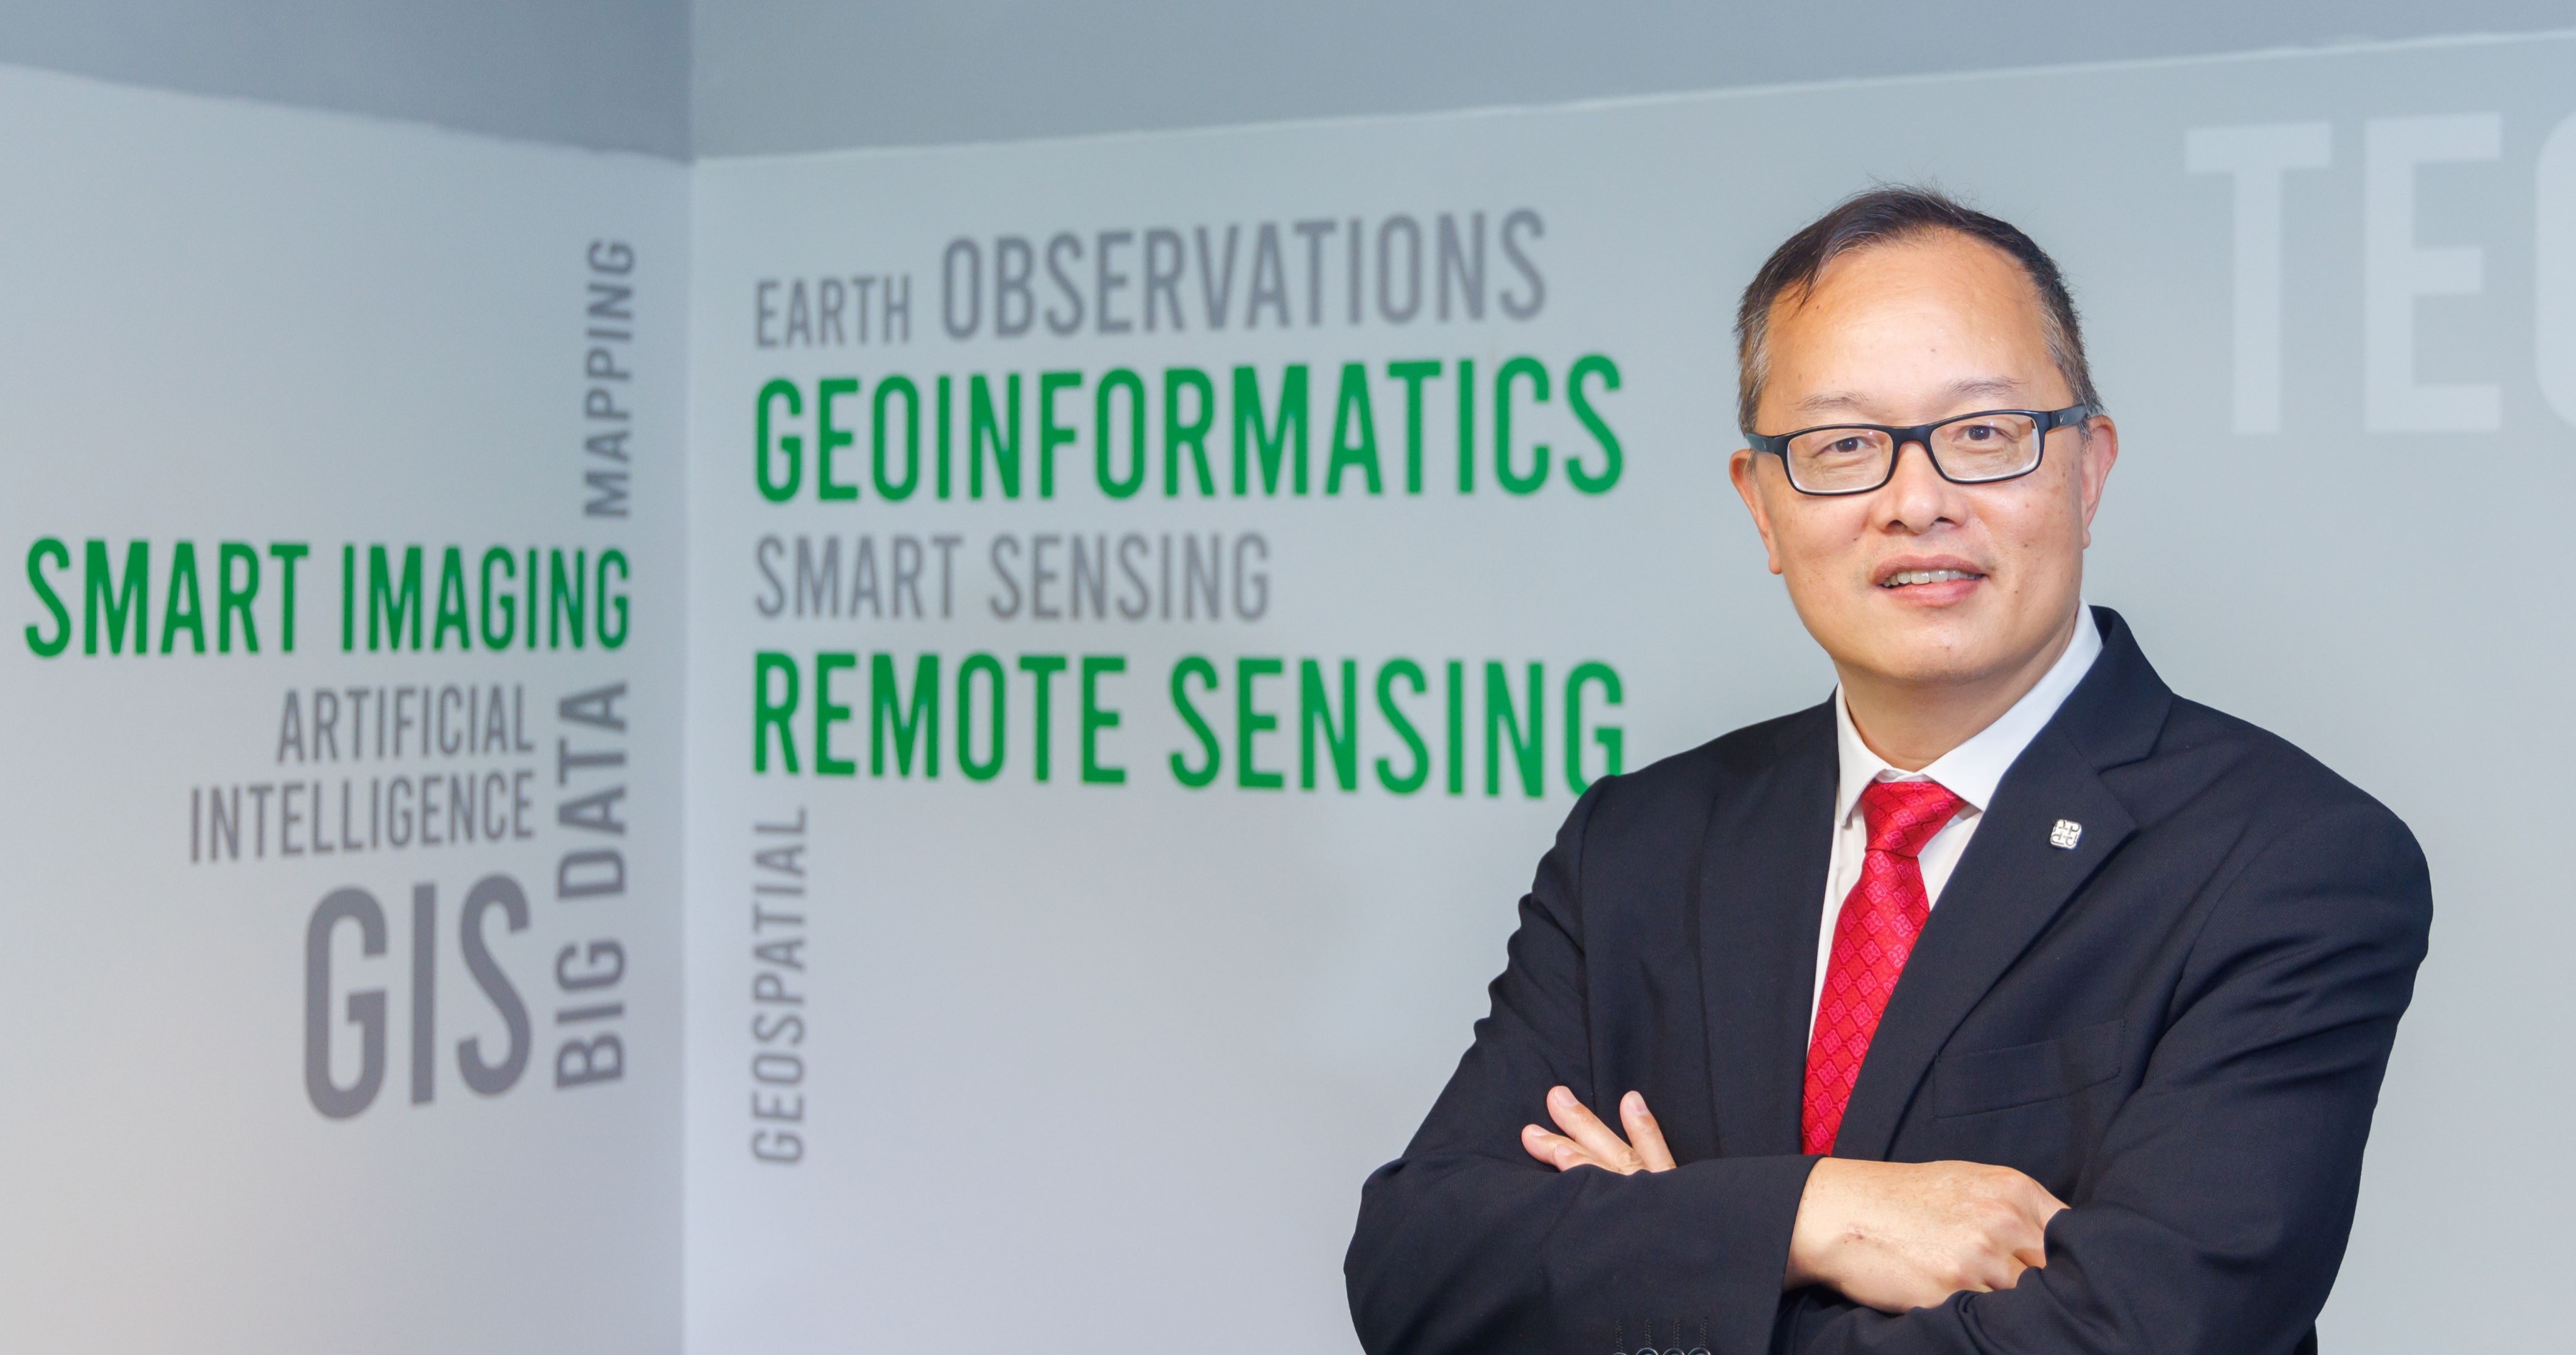 Prof. Qihao Weng, Chair Professor of Geomatics and Artificial Intelligence of the Department of Land Surveying and Geo-Informatics, and Global STEM Professor, is also the Principal Investigator and Director of the PolyU Research Centre for Artificial Intelligence in Geomatics.